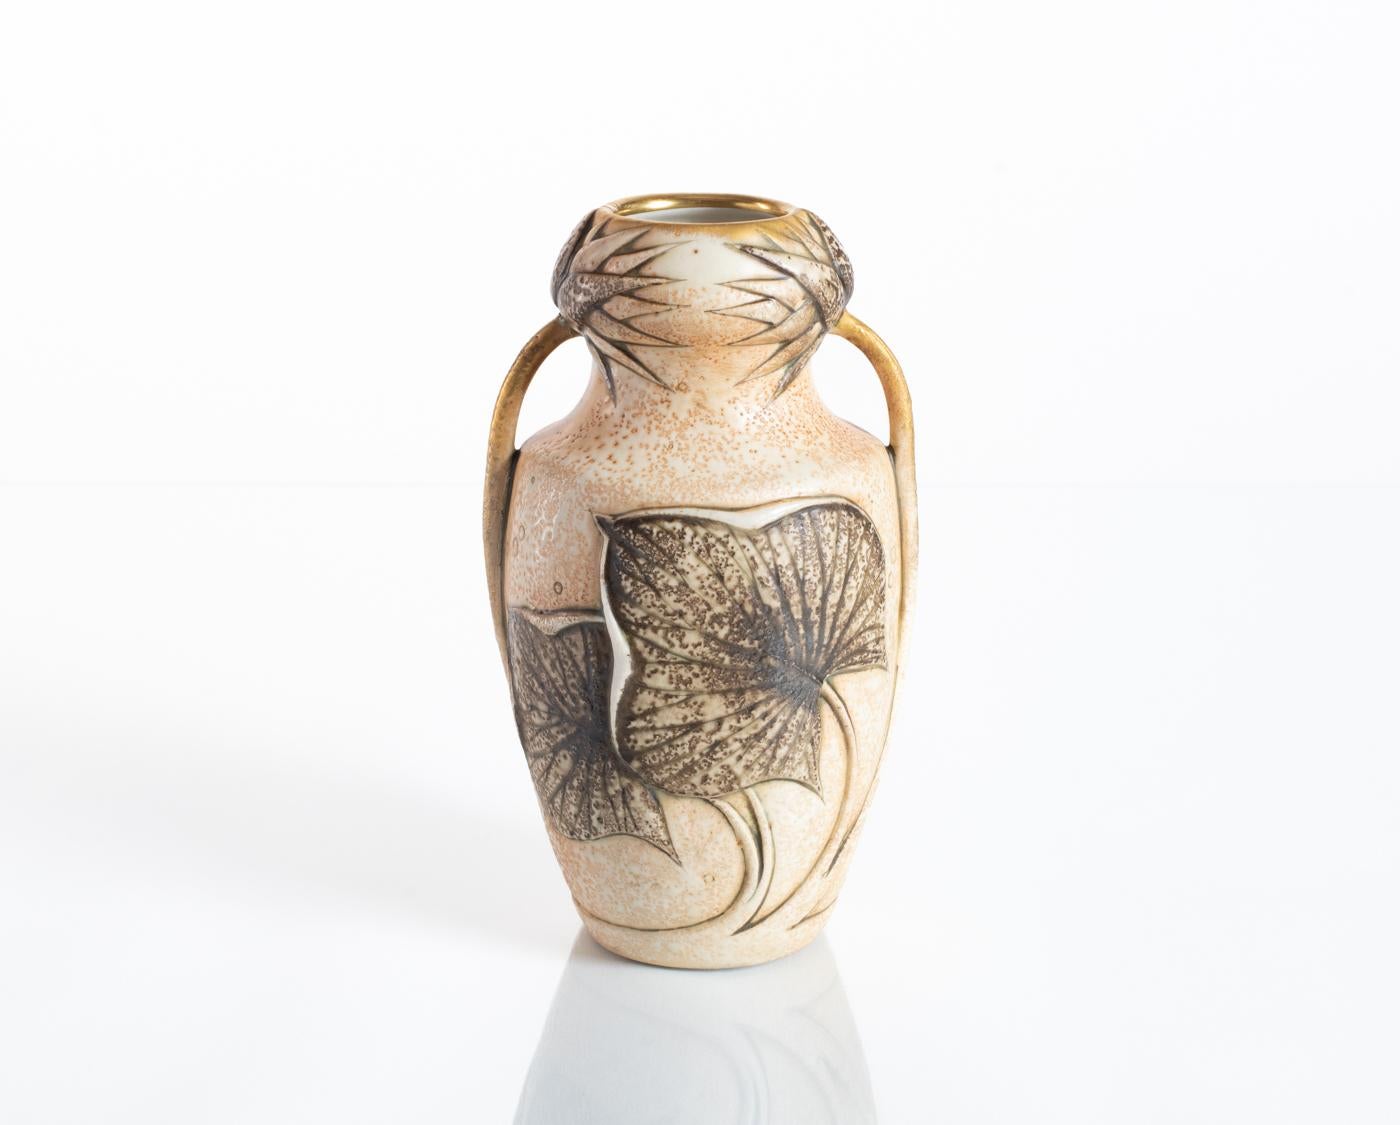 Amphora Vase with Water Lilies by Ernst Wahliss, att. Paul Dachsel, c. 1900 For Sale 4